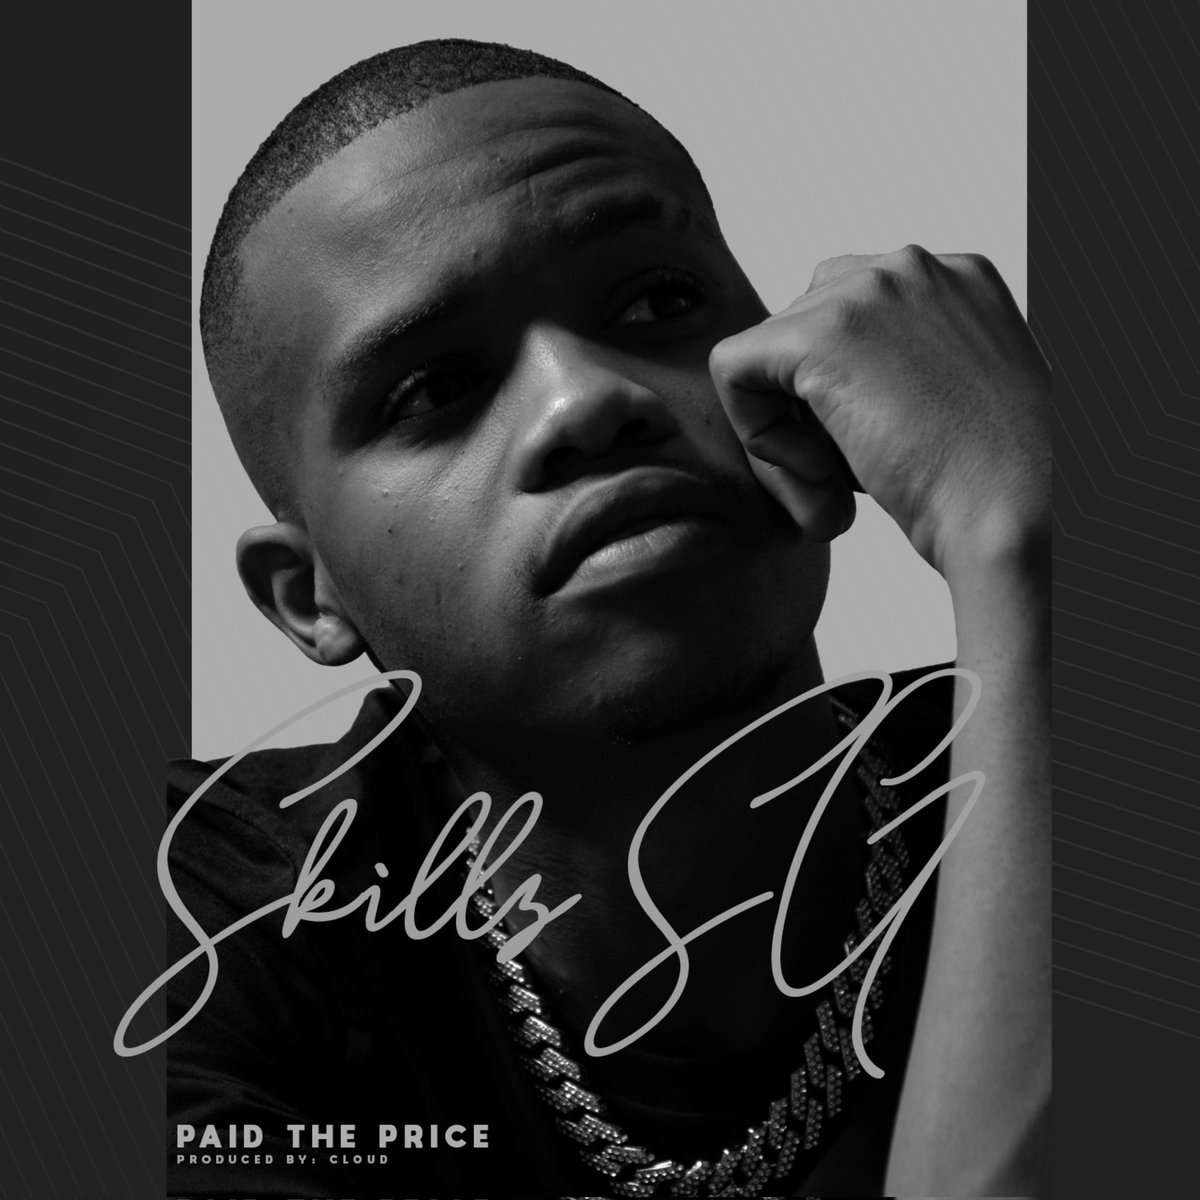 My new single Paid The Price is out now on all digital platforms distrokid.com/hyperfollow/sk… #newsingle #skillz #LisaHitsMTVStage #VMAs